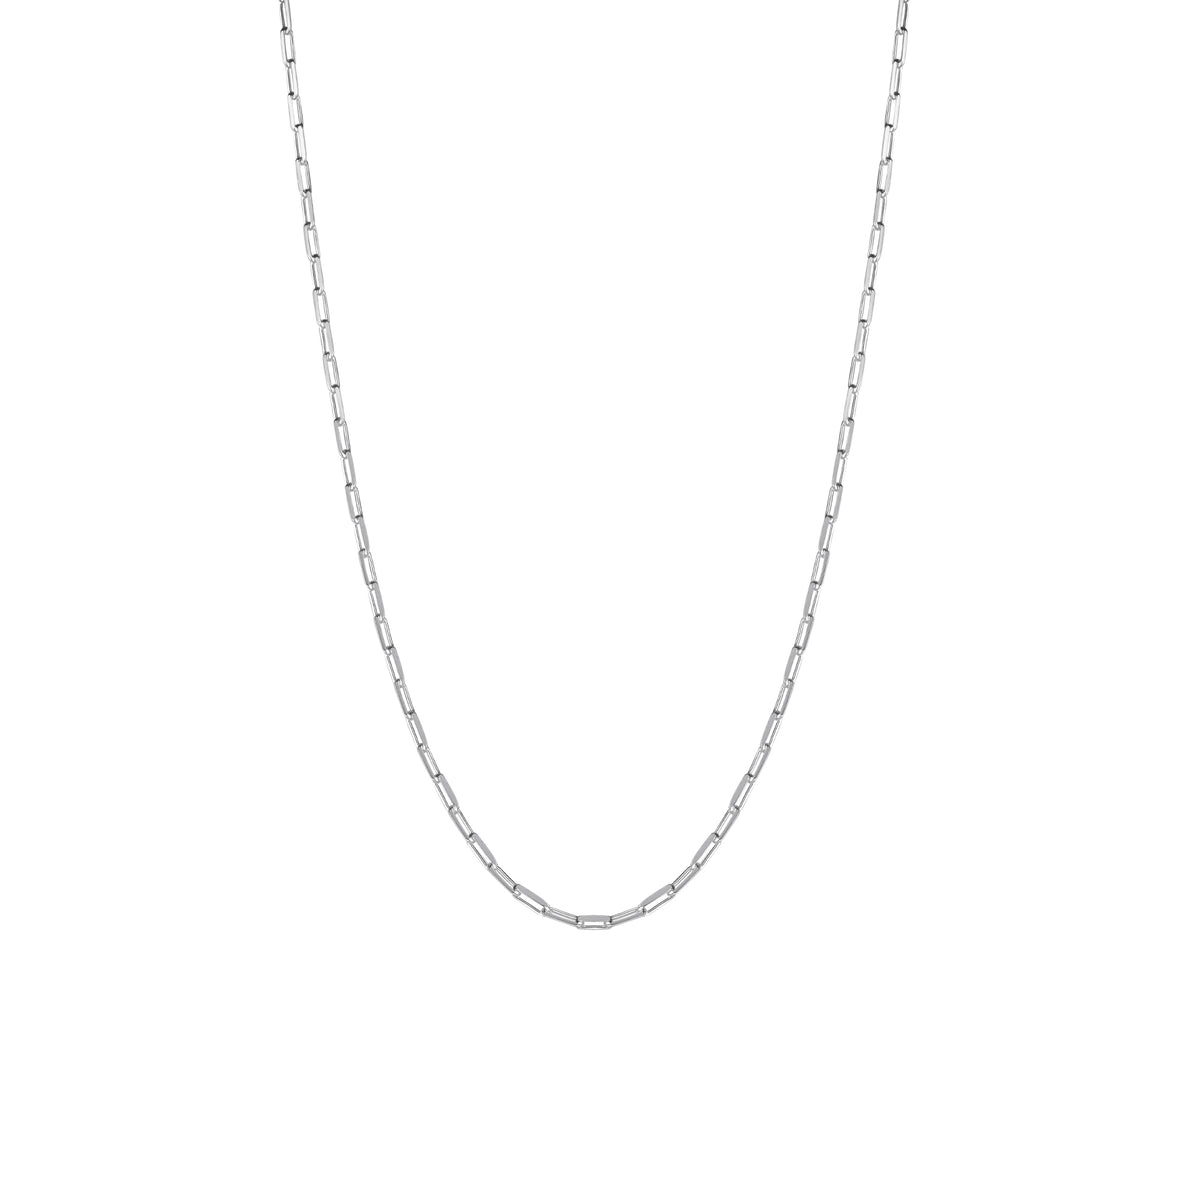 Rectangular Link Chain Sterling Silver Necklace